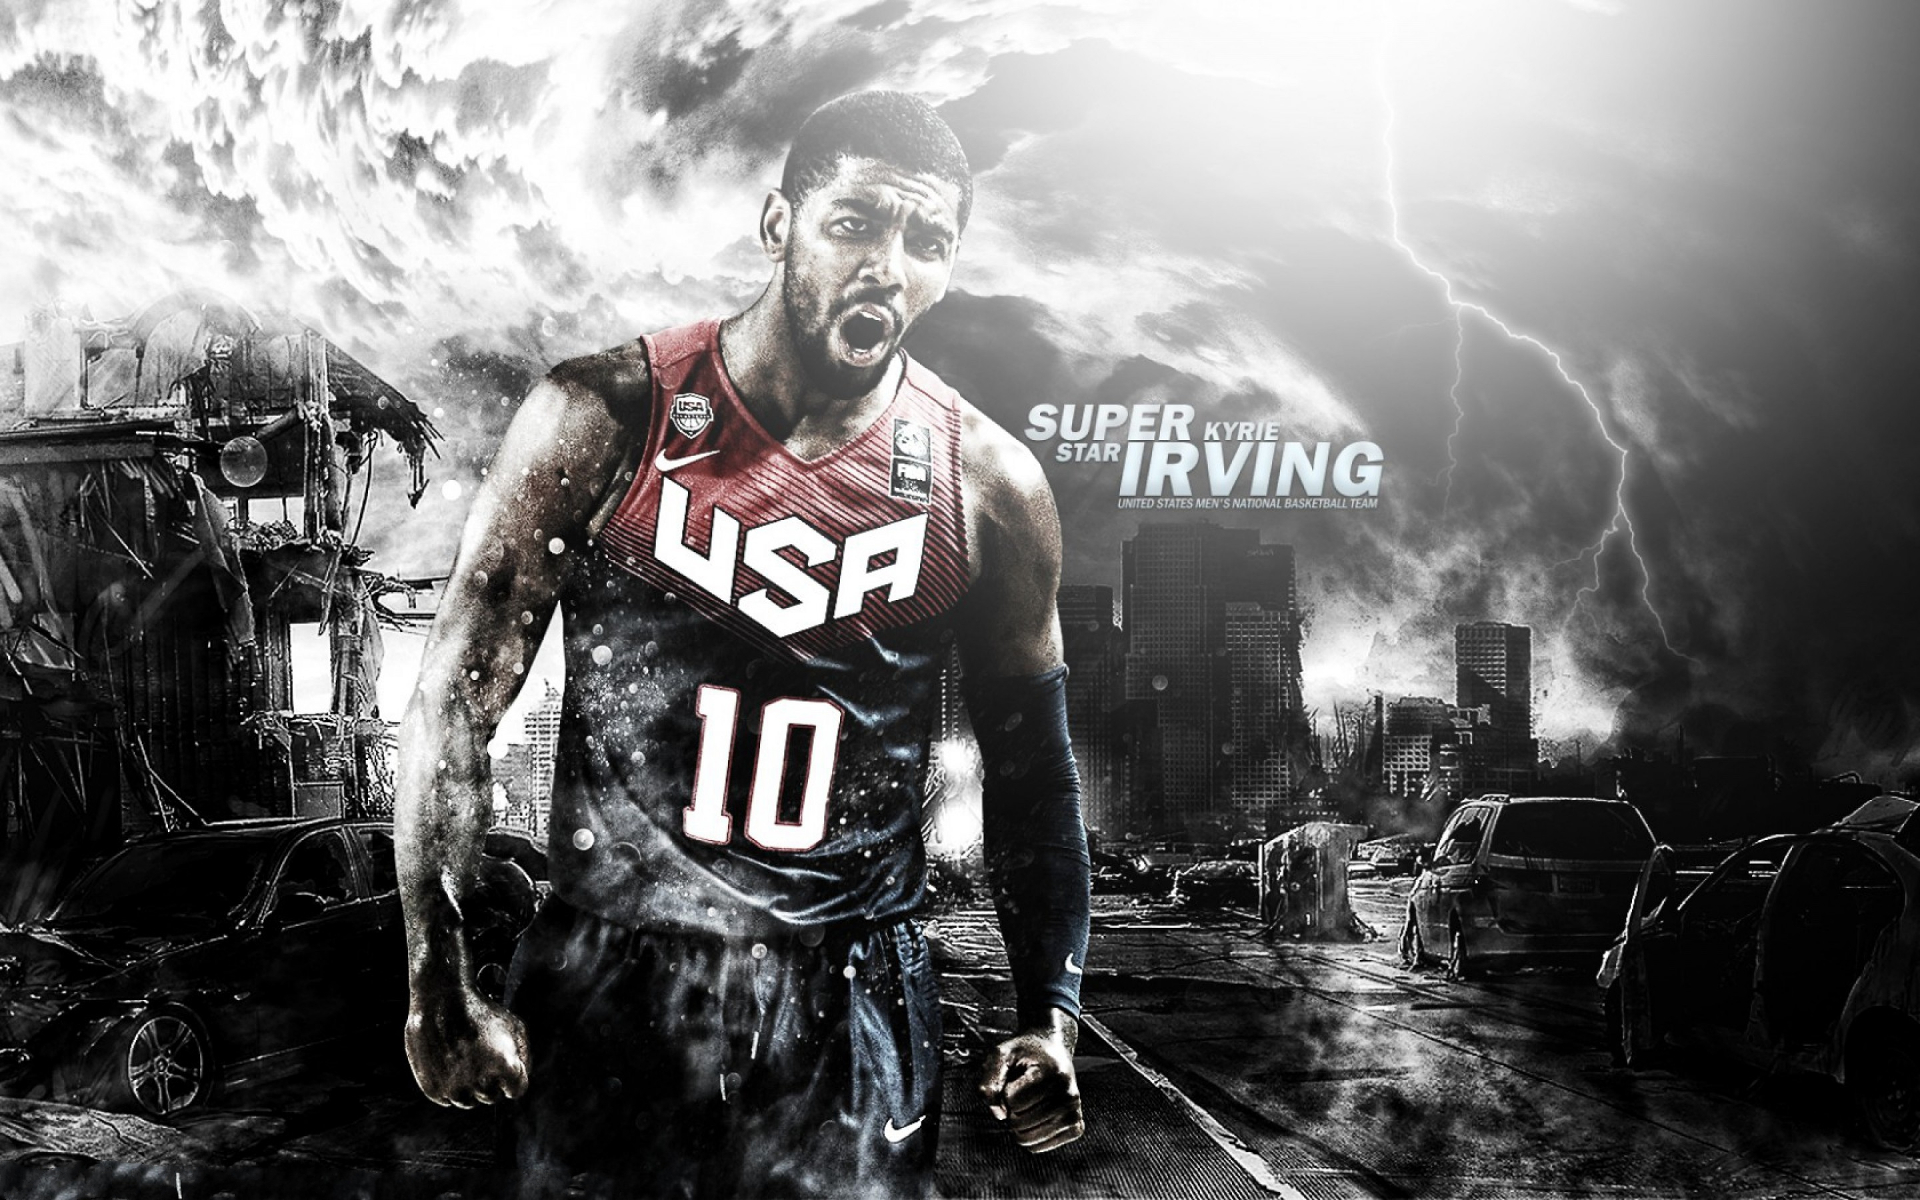 20+ Kyrie Irving HD Wallpapers and Backgrounds